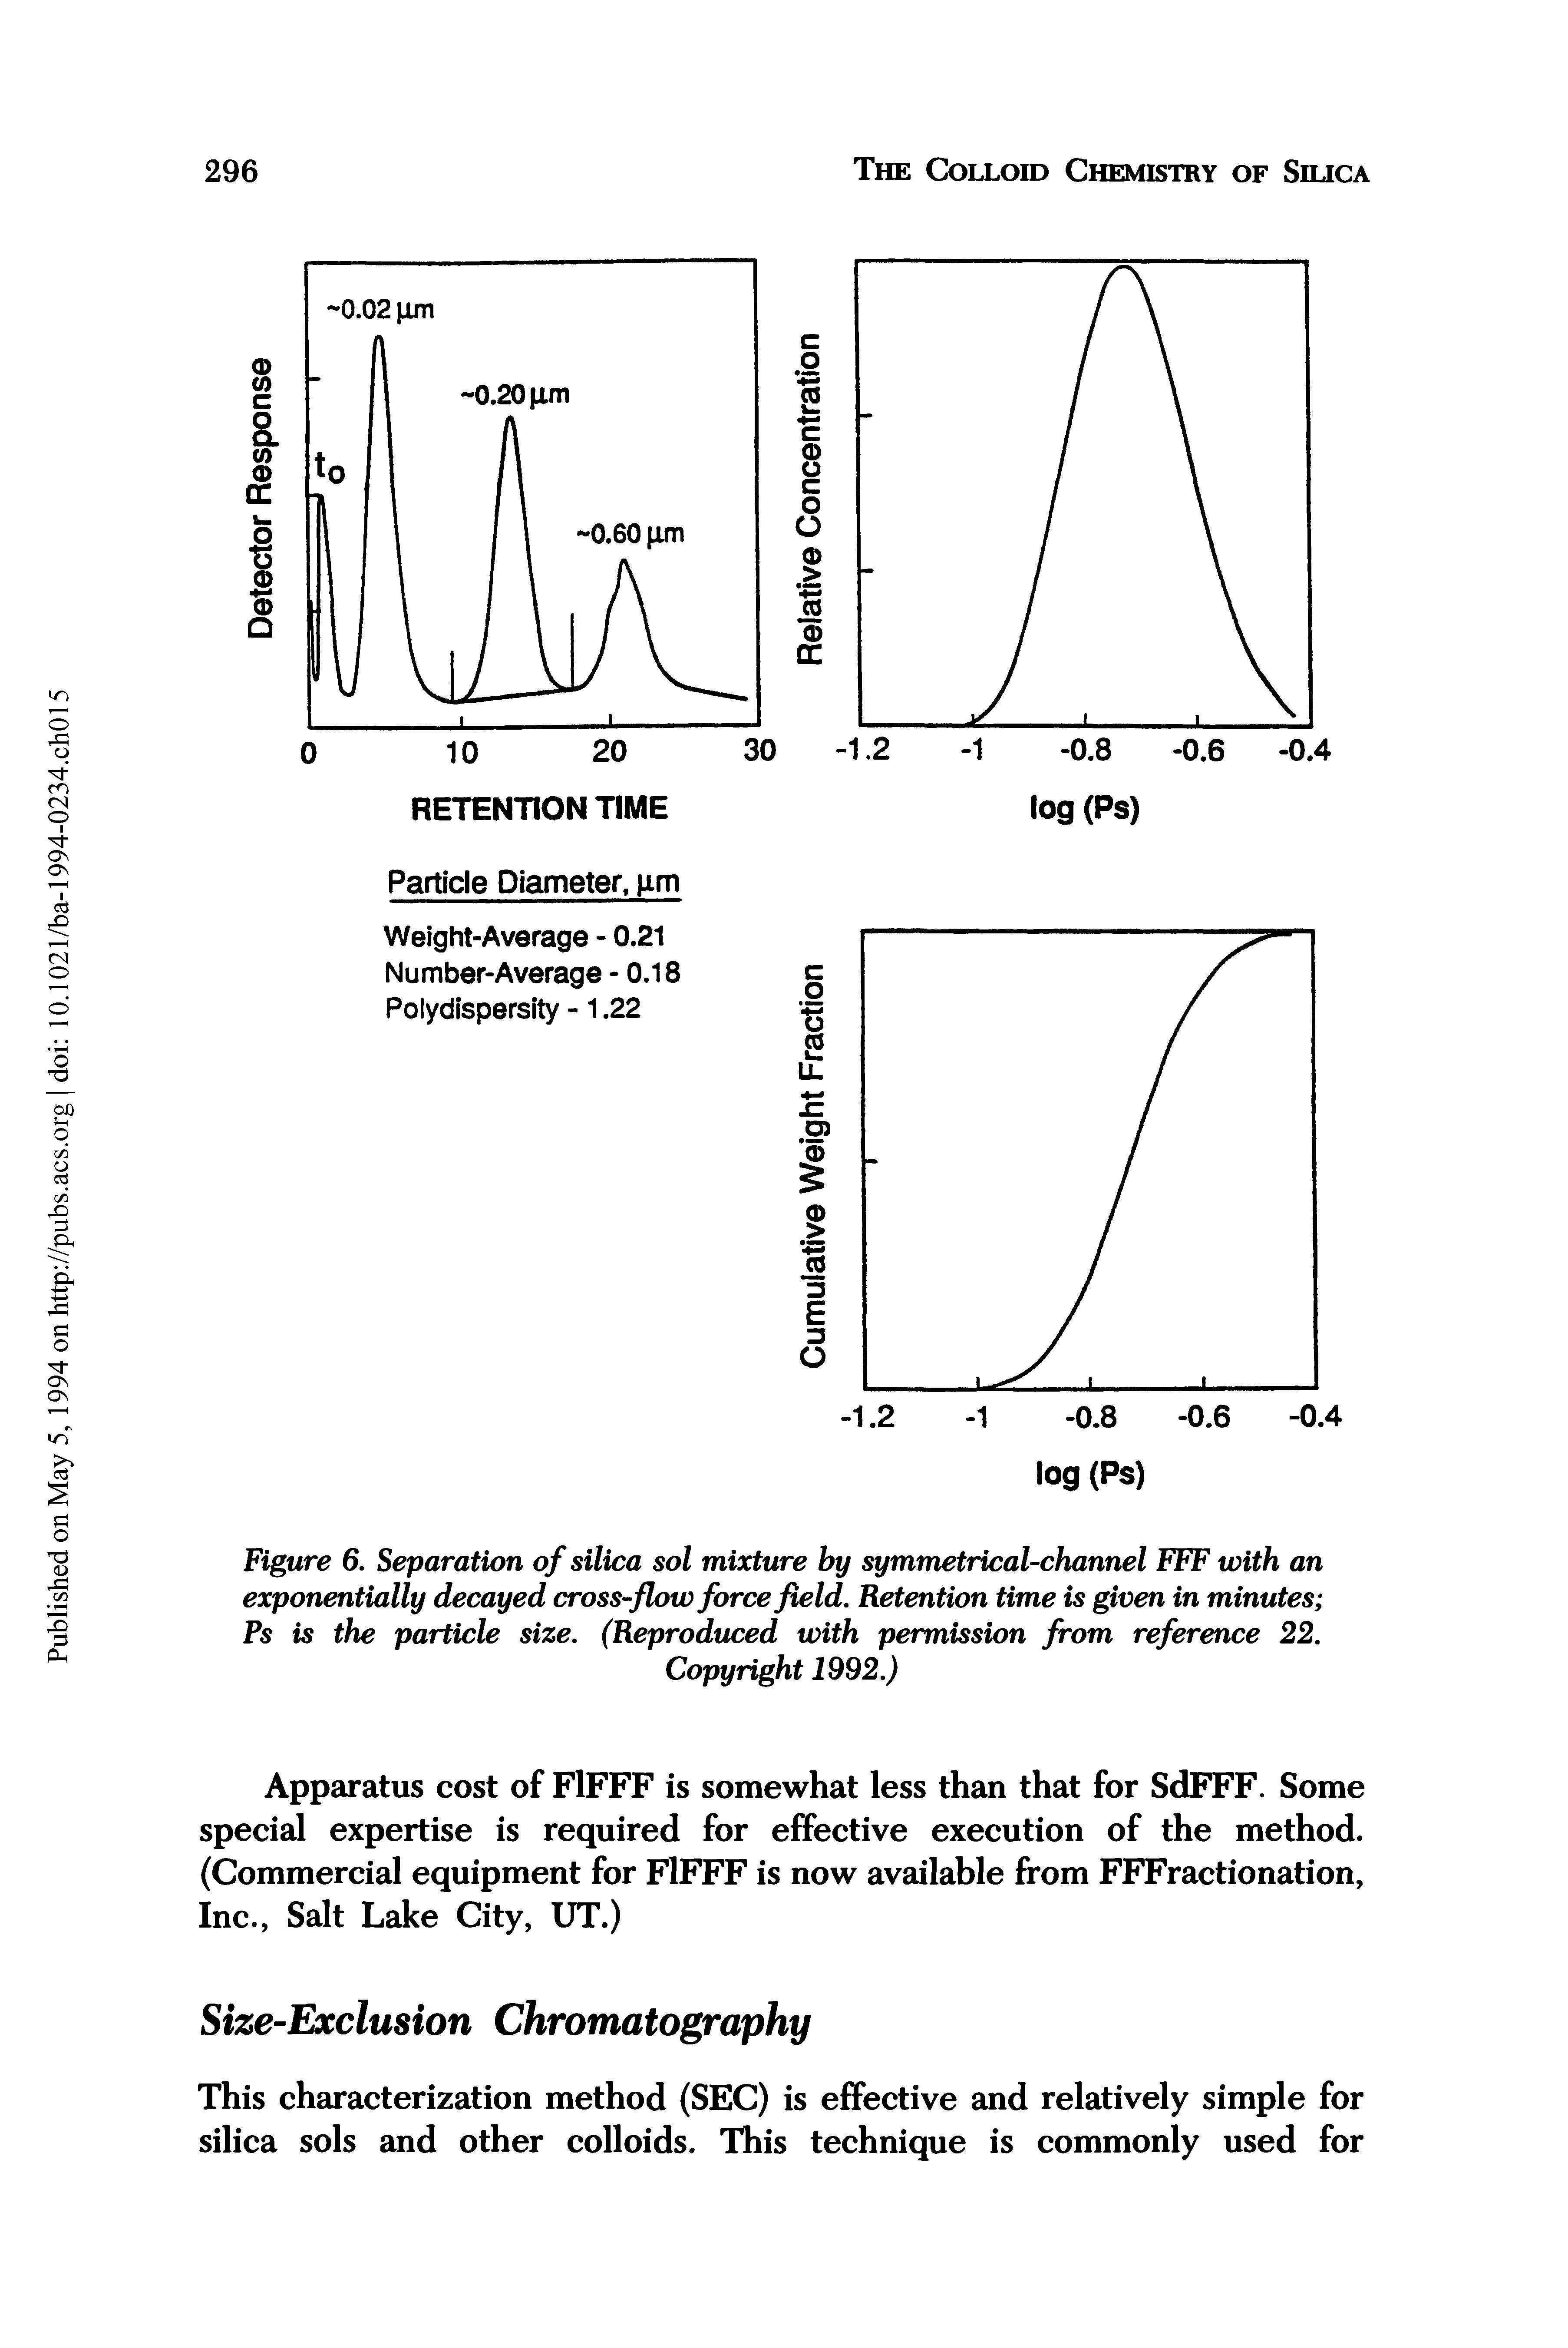 Figure 6. Separation of silica sol mixture by symmetrical-channel FFF with an exponentially decayed cross-flow force field. Retention time is given in minutes Ps is the particle size. (Reproduced with permission from reference 22.